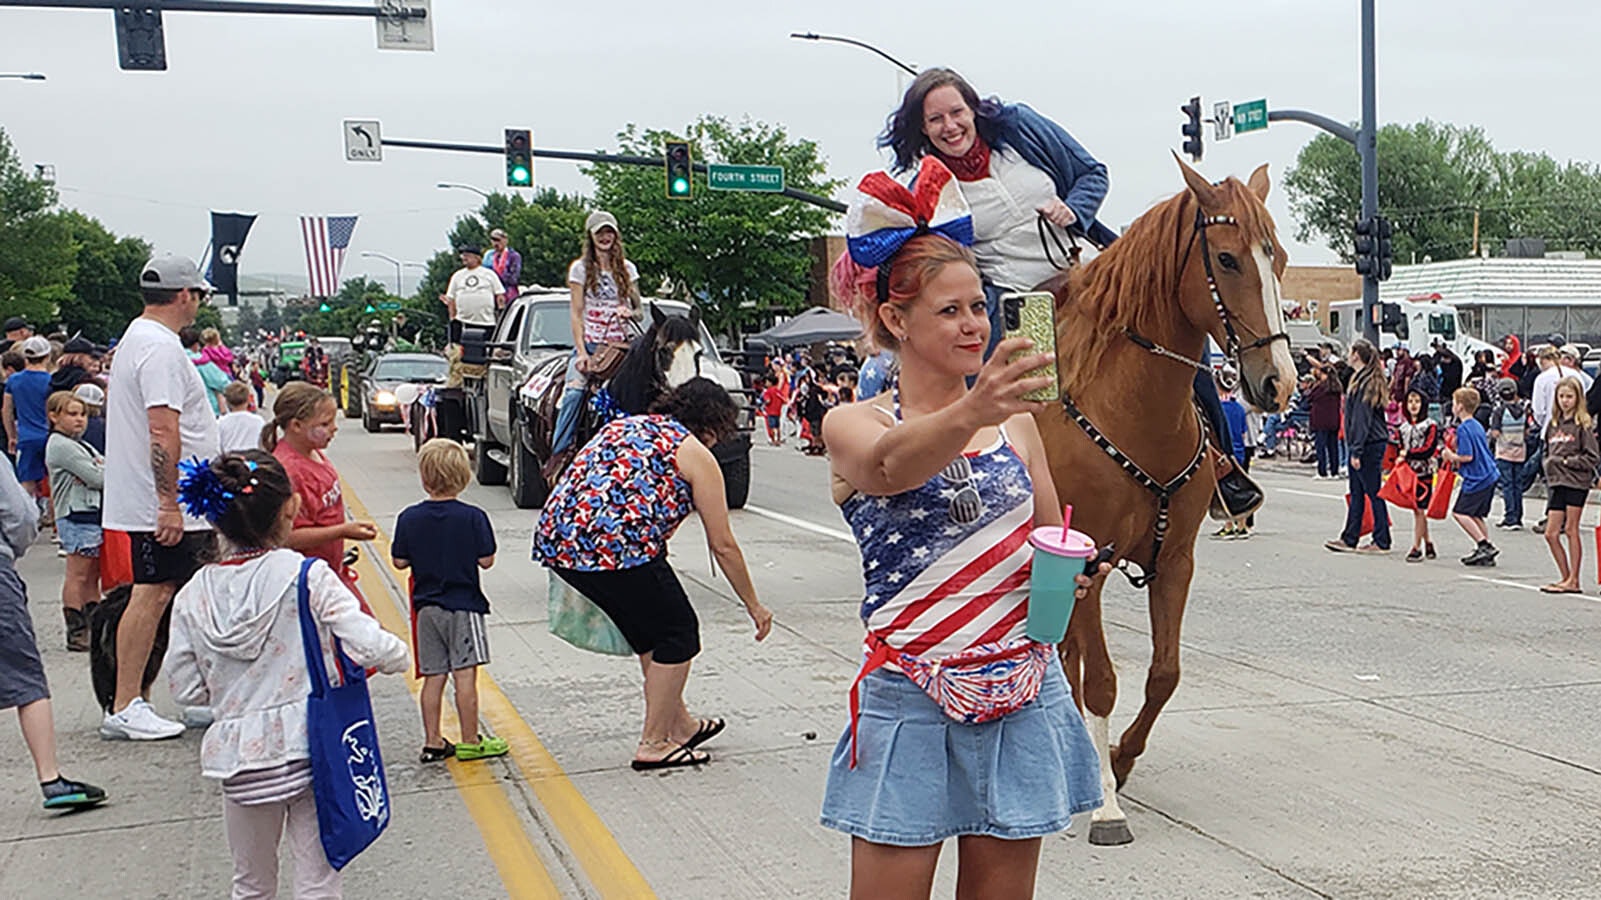 A perfect selfie moment during the Lander Fourth of July Parade.